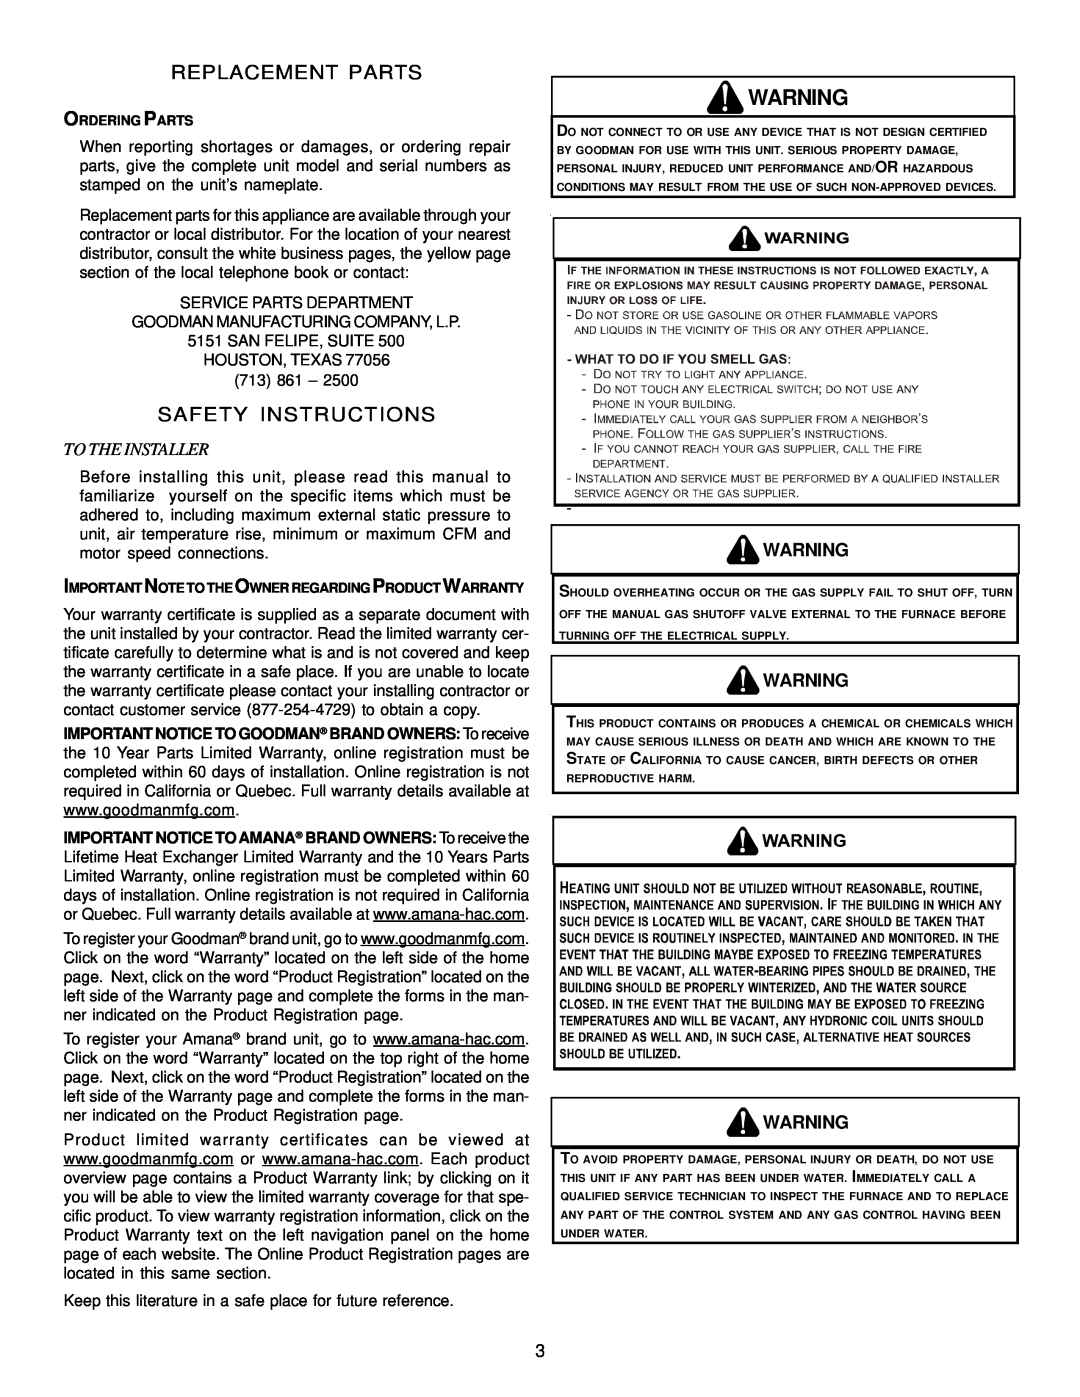 Goodman Mfg A/GPG13 M operating instructions Replacement Parts, Safety Instructions, To The Installer 